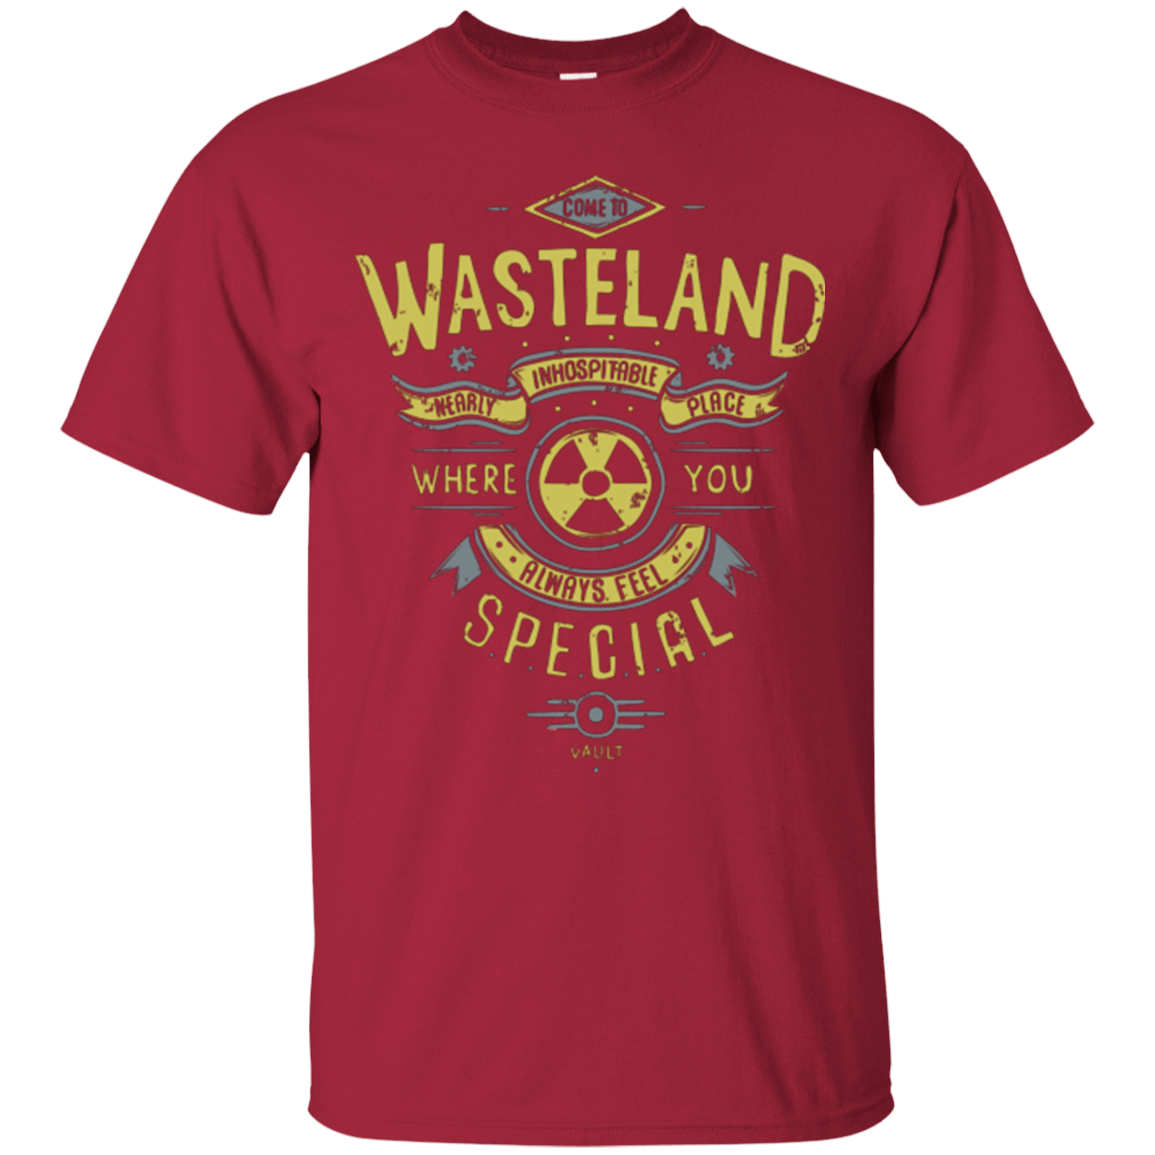 T-Shirts Cardinal / Small Come to wasteland T-Shirt